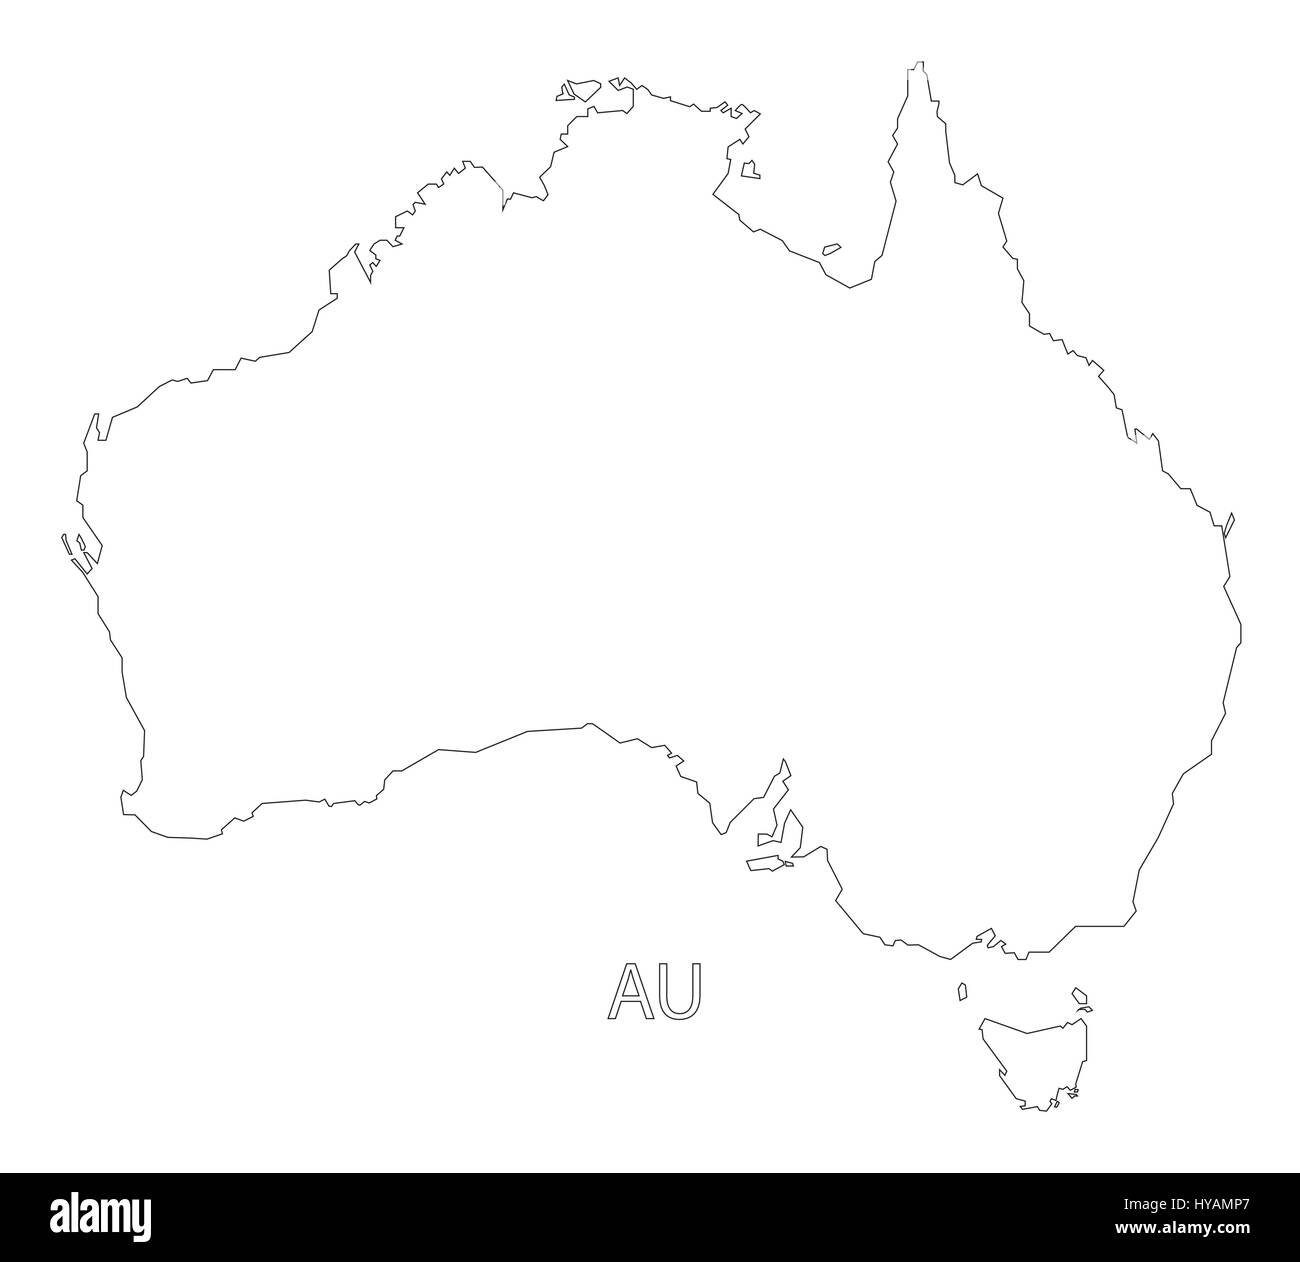 Hypothetical outlines of Austr [IMAGE]